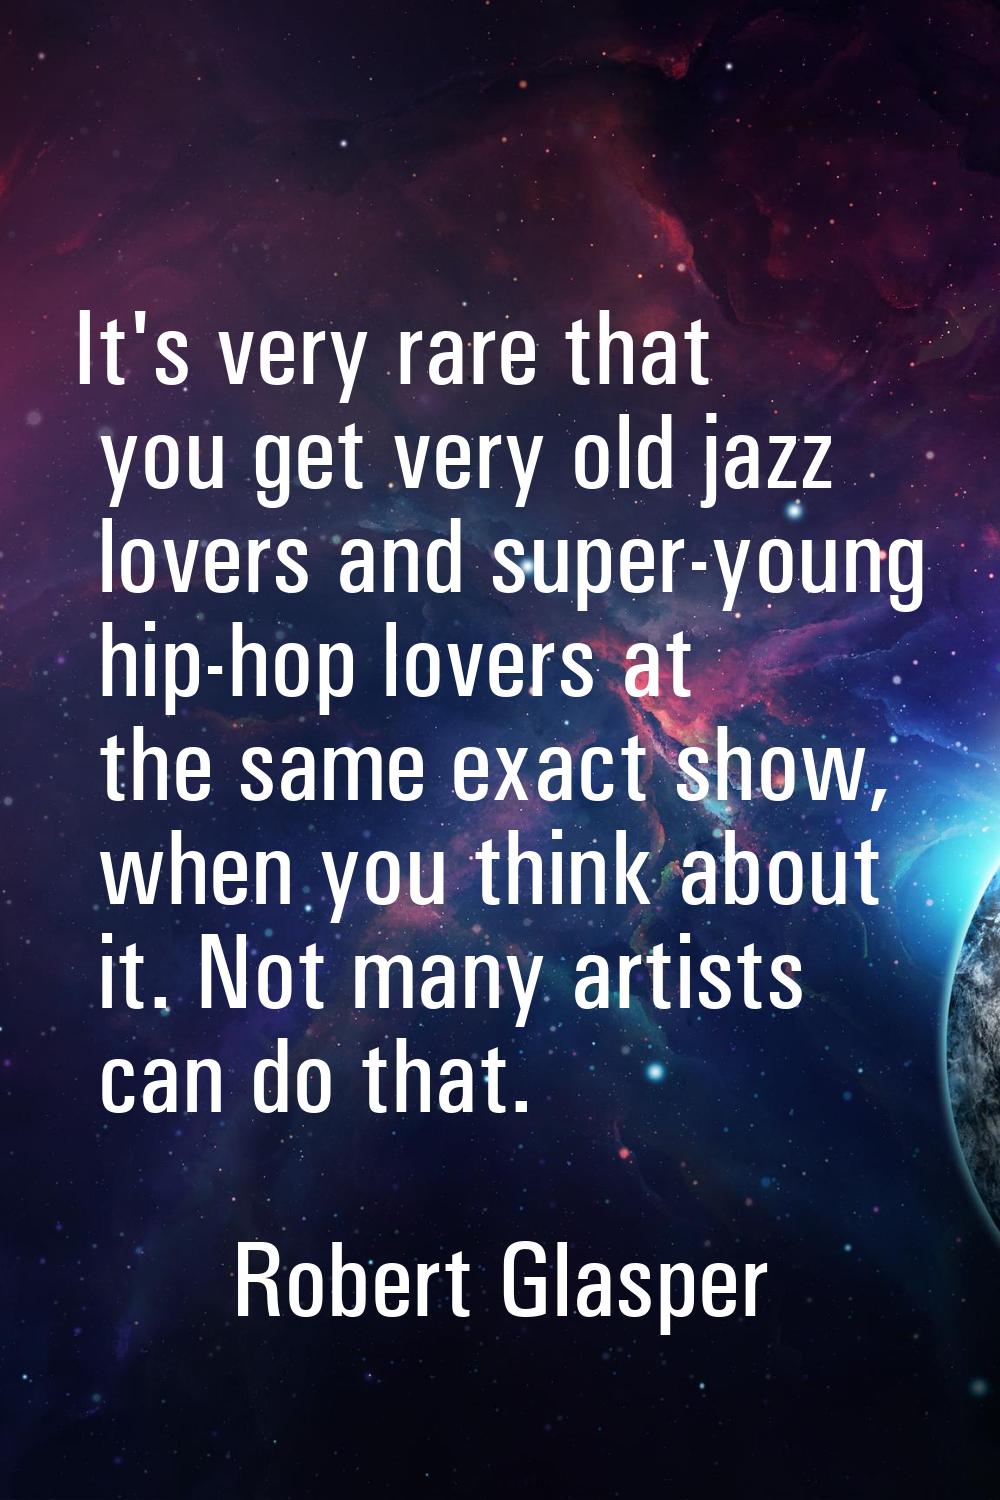 It's very rare that you get very old jazz lovers and super-young hip-hop lovers at the same exact s